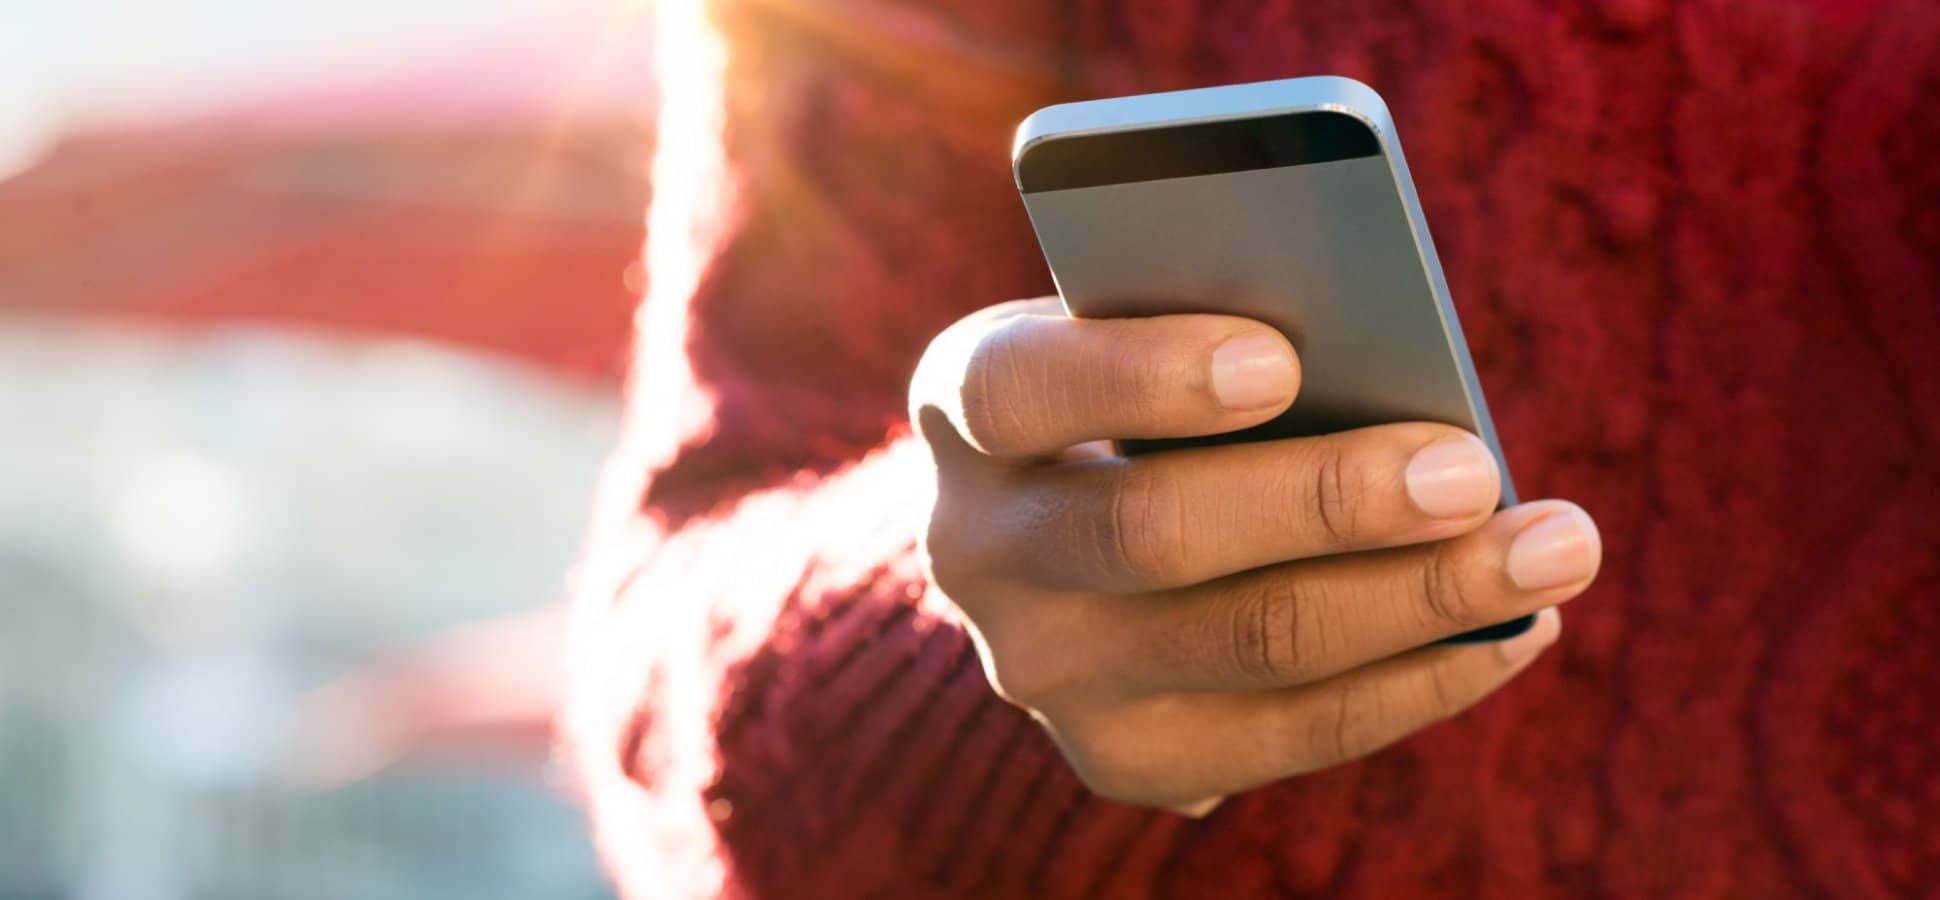 Vitaminwater Will Pay $100,000 If You Give Up Your Smartphone For A Year!